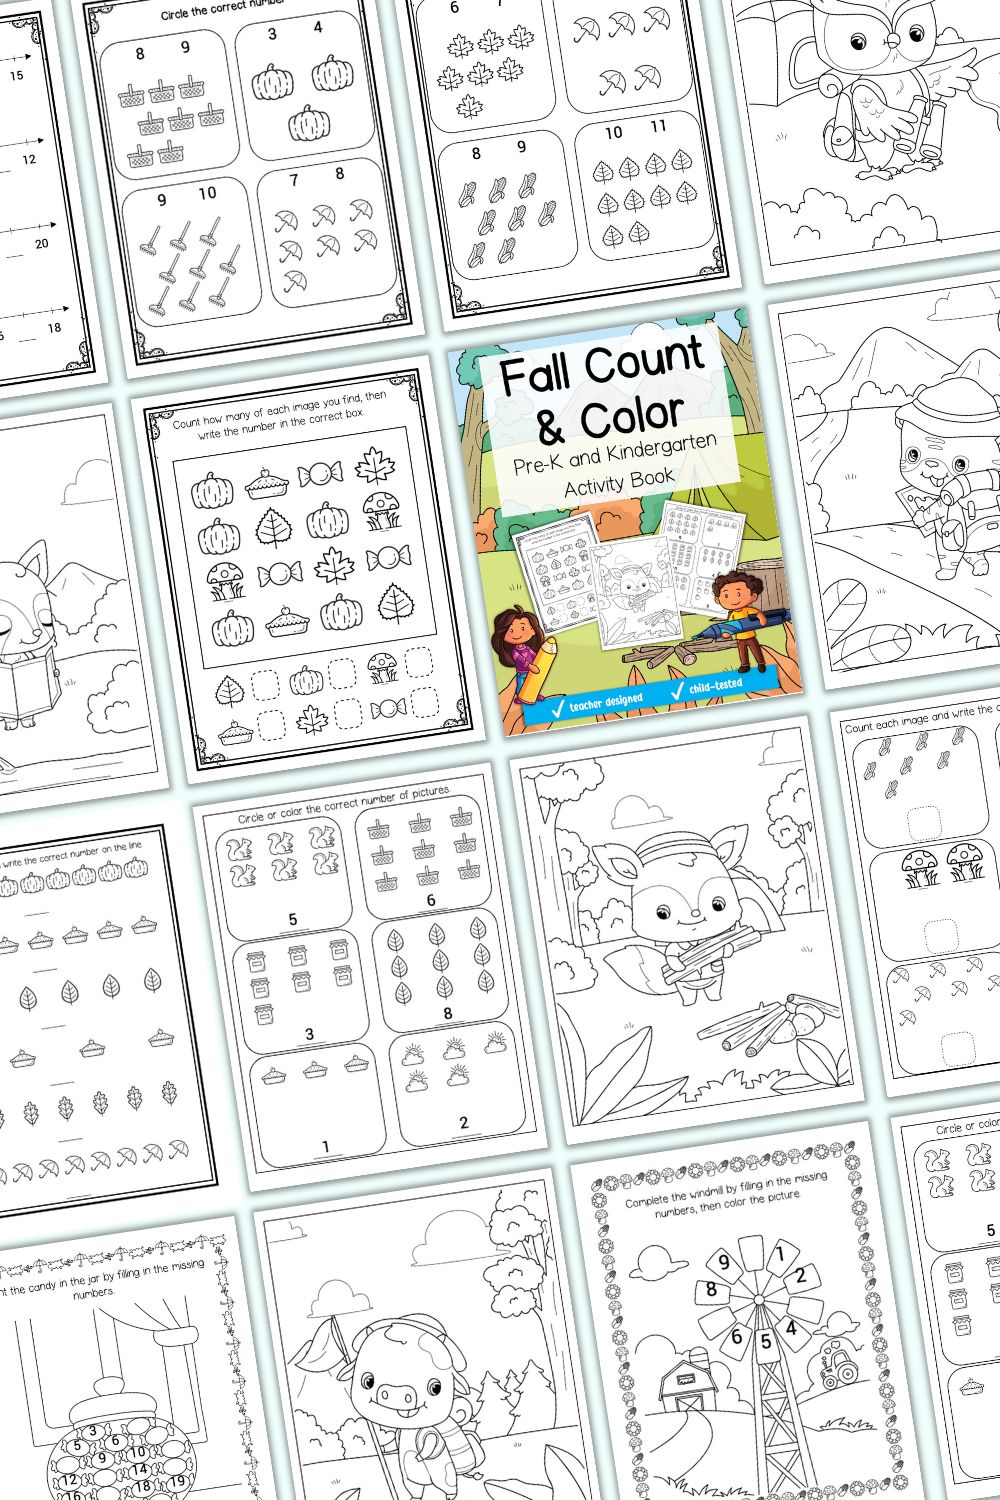 A preview of pages from inside Fall Count and Color preschool and kindergarten activity book